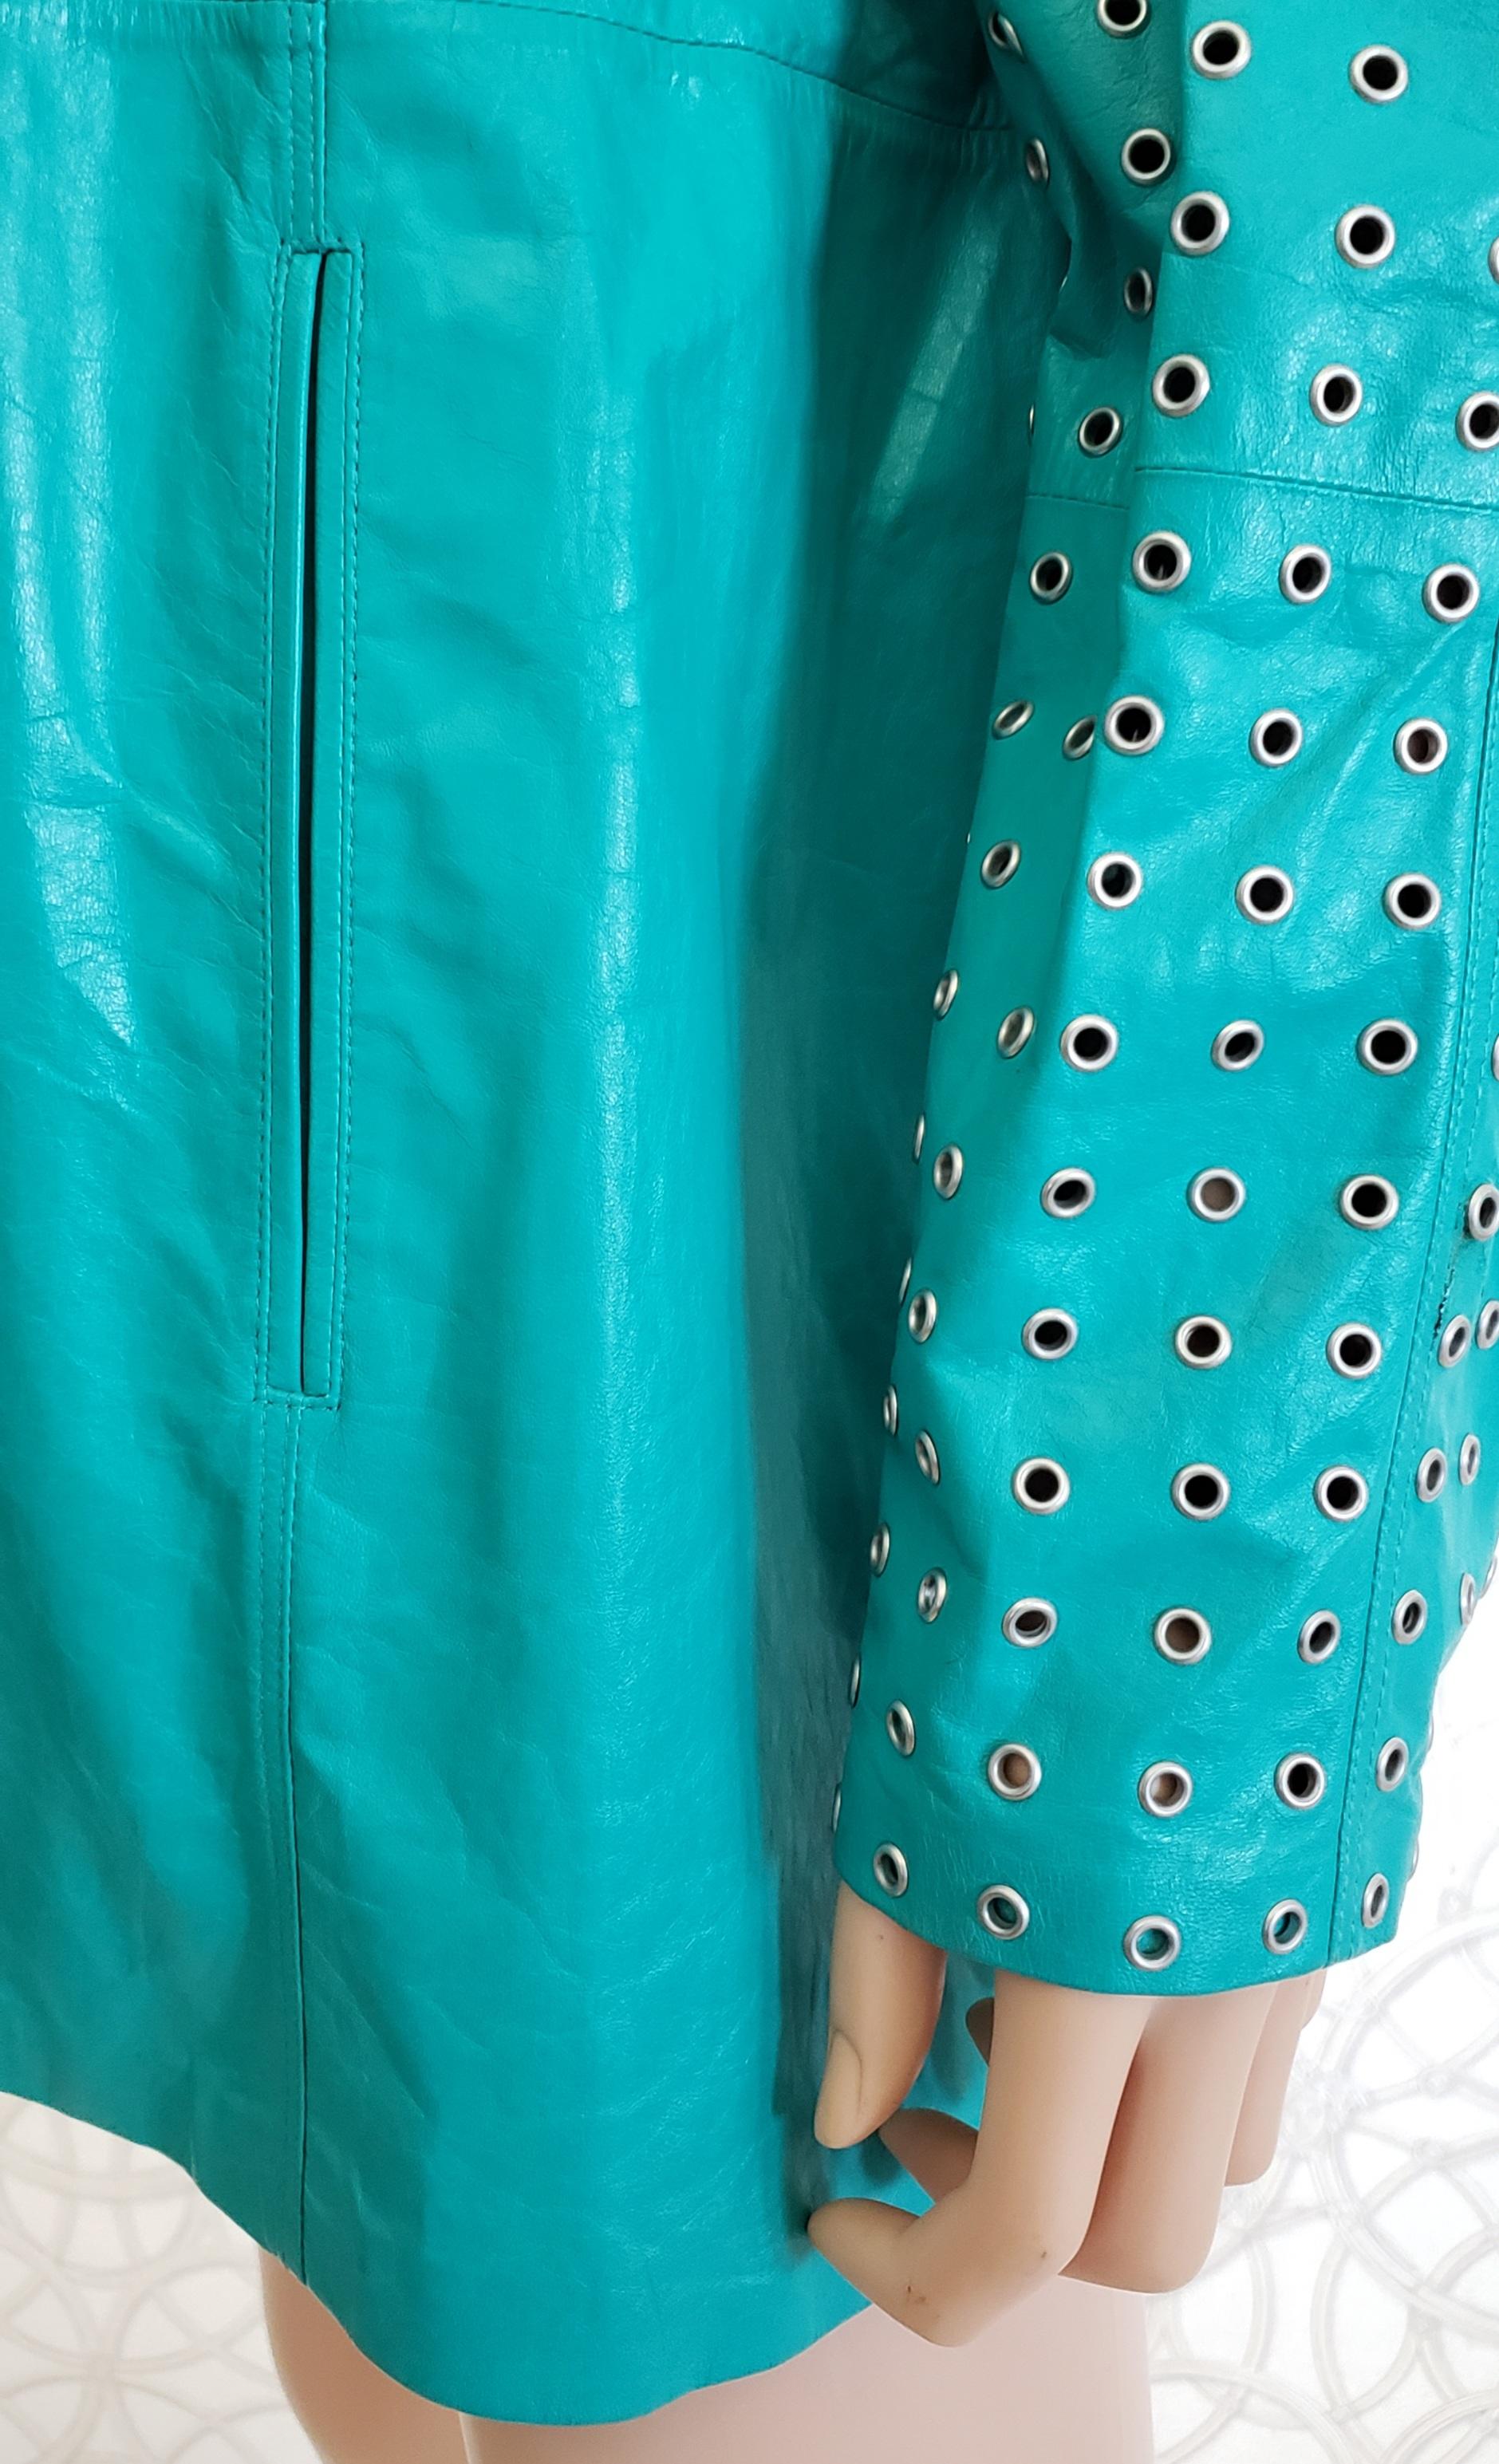 NEW GIANNI VERSACE EMERALD GREEN LEATHER JACKET with RIVETS Sz IT 40 - US 4/6 For Sale 9